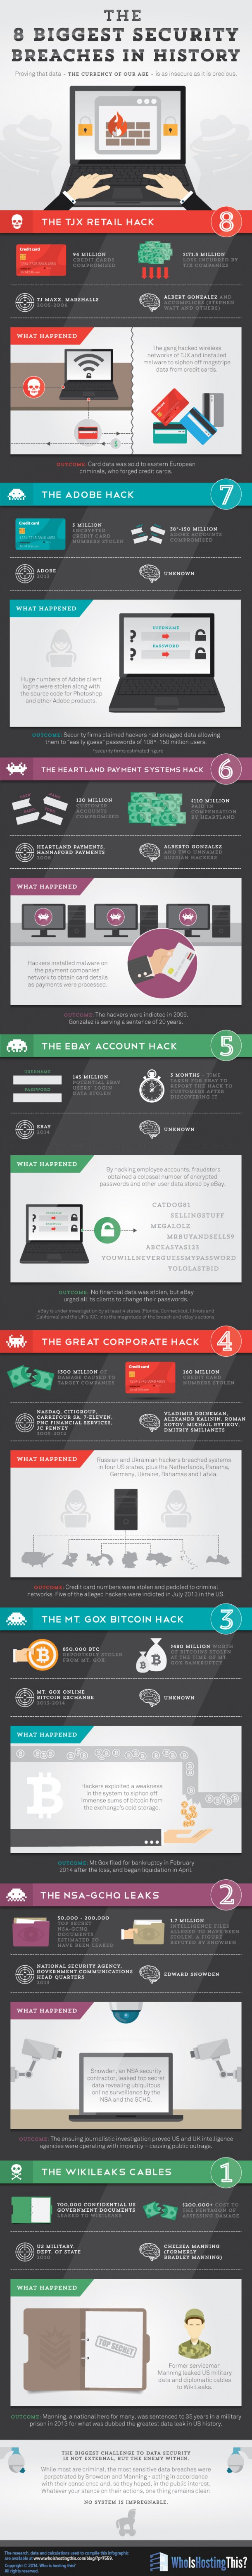 8 biggest security breaches in history